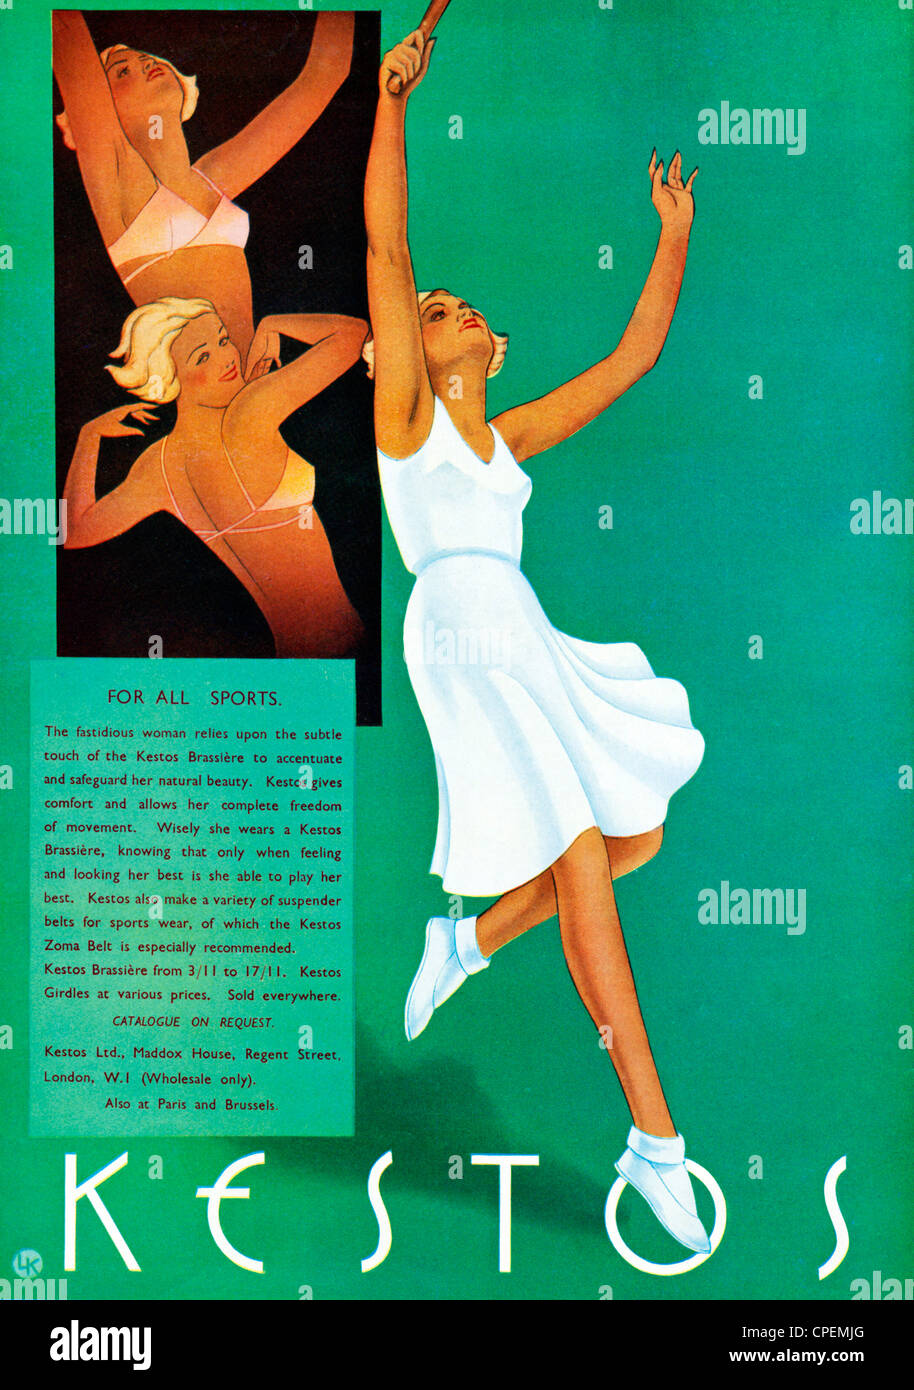 Kestos Bra, Tennis, 1932 advert for the fashionable ladies undergarments,  allowing complete freedom of movement for all sports Stock Photo - Alamy